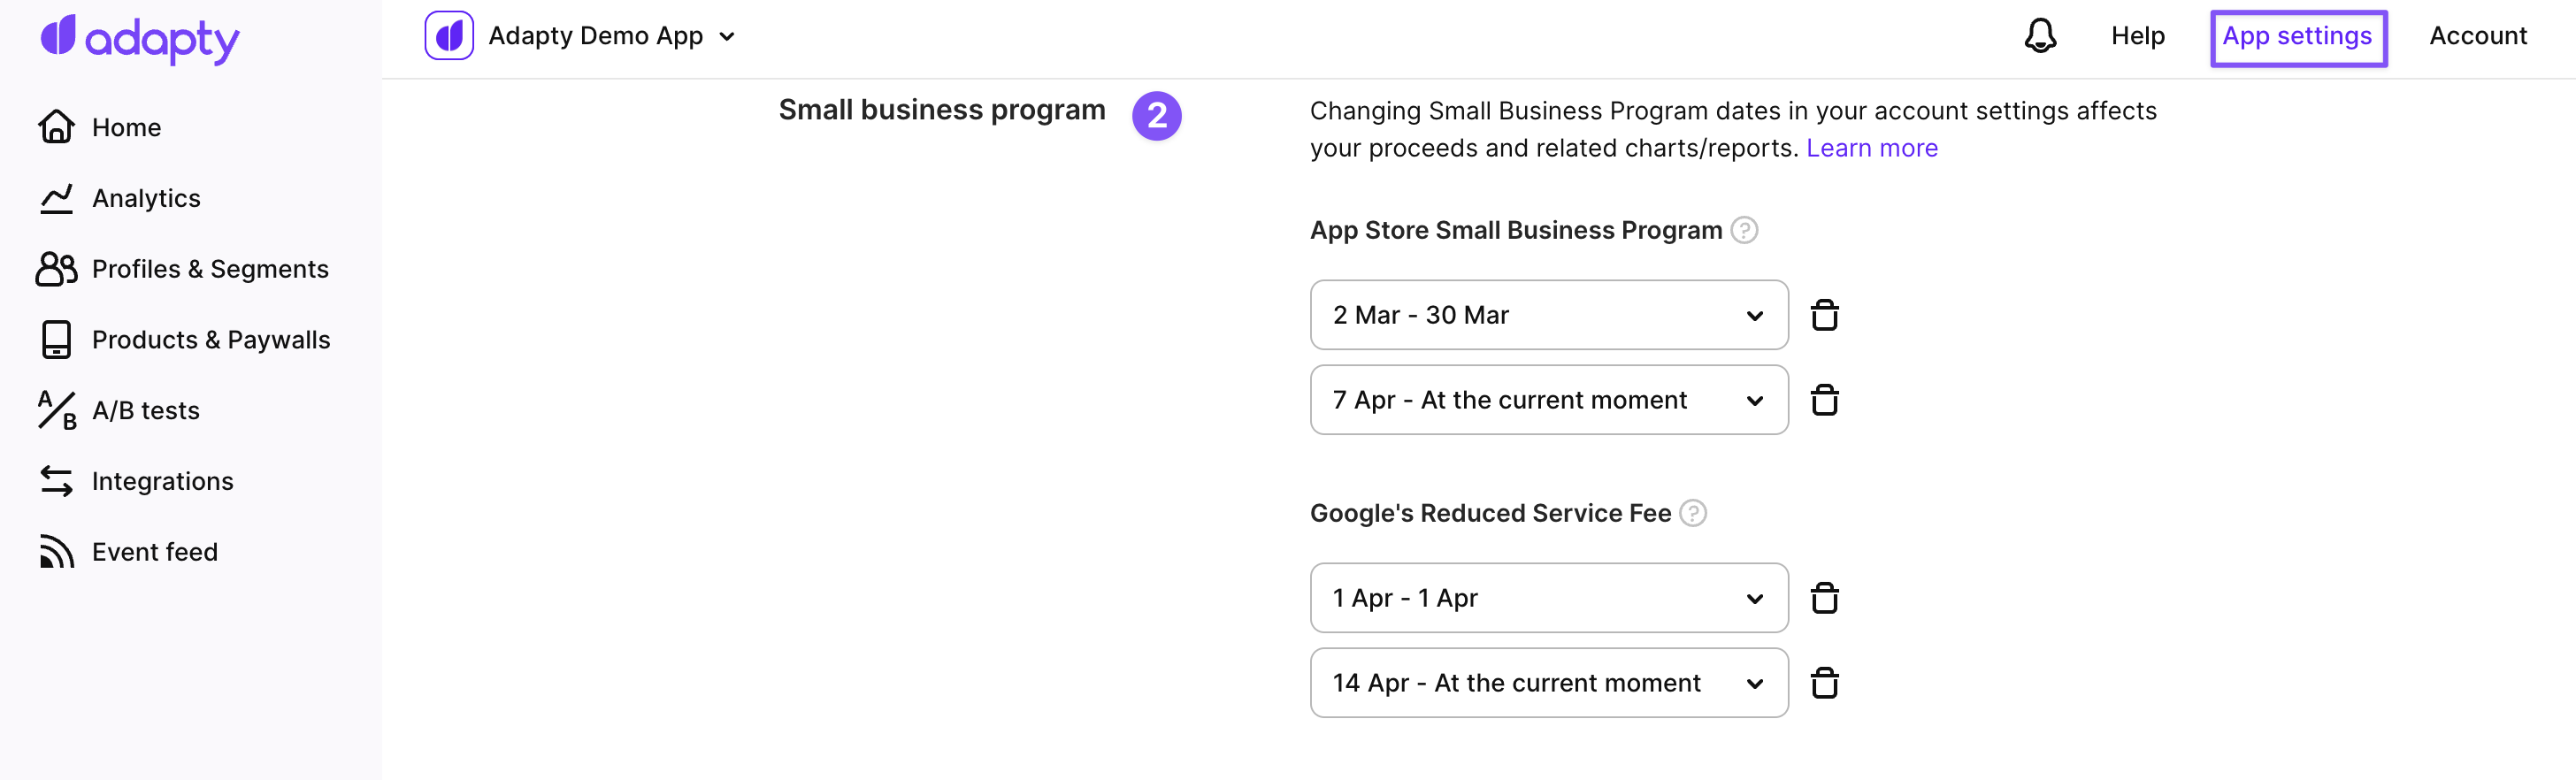 App settings - Member of Small Business Program and Reduced Service Fee